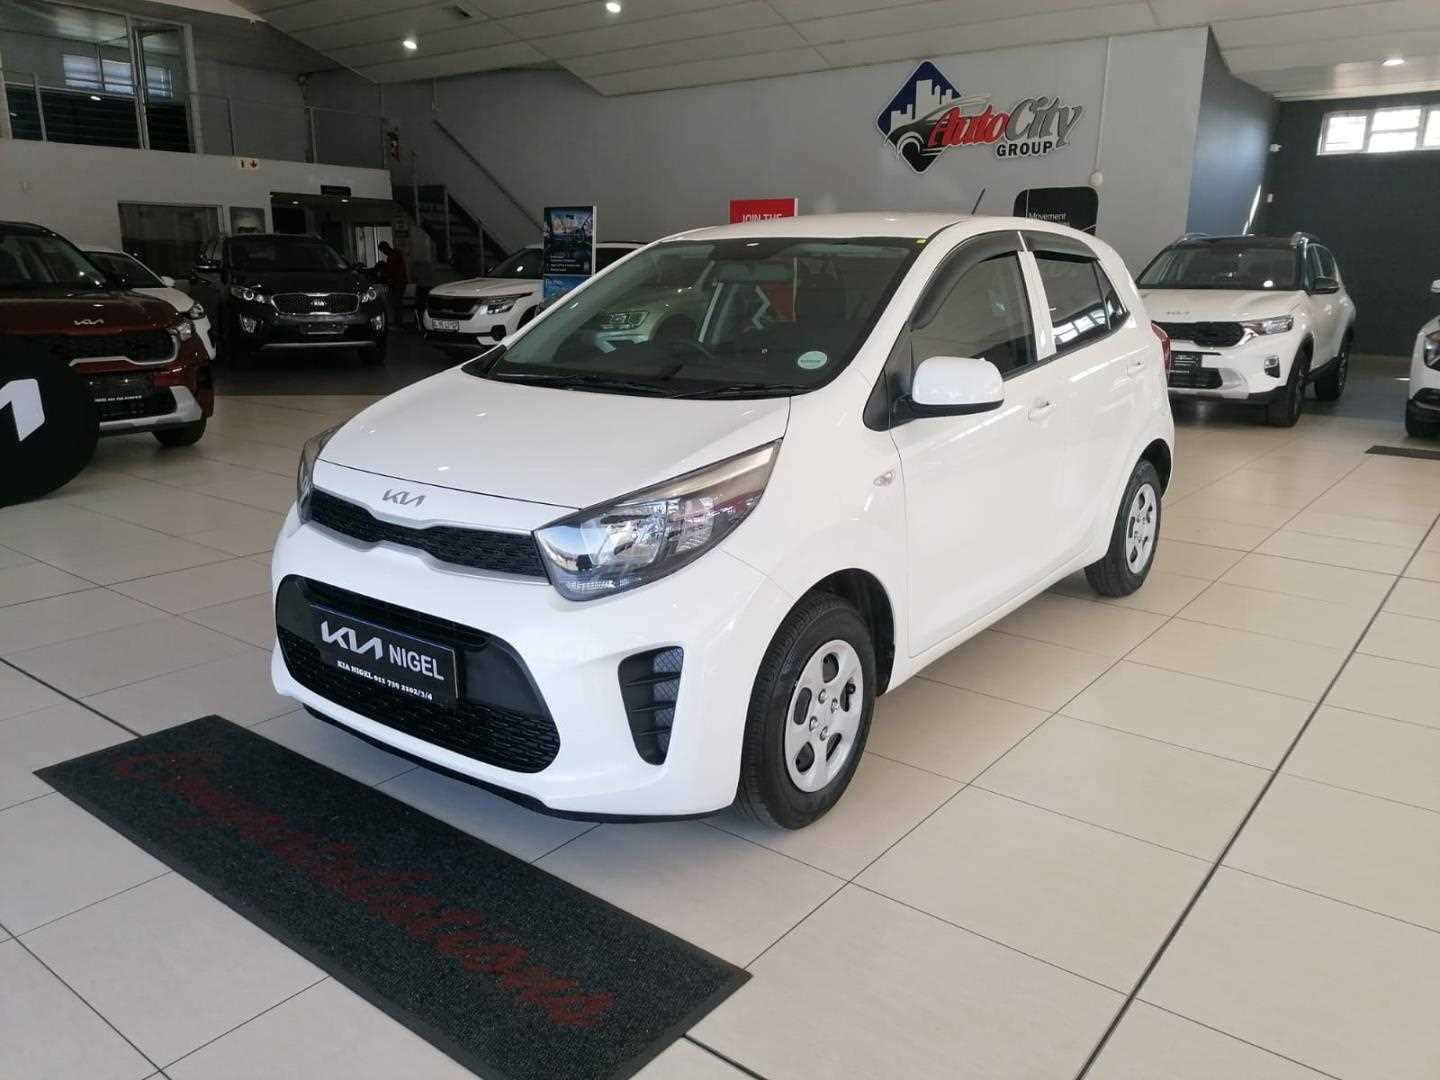 KIA 1.0 START for Sale in South Africa